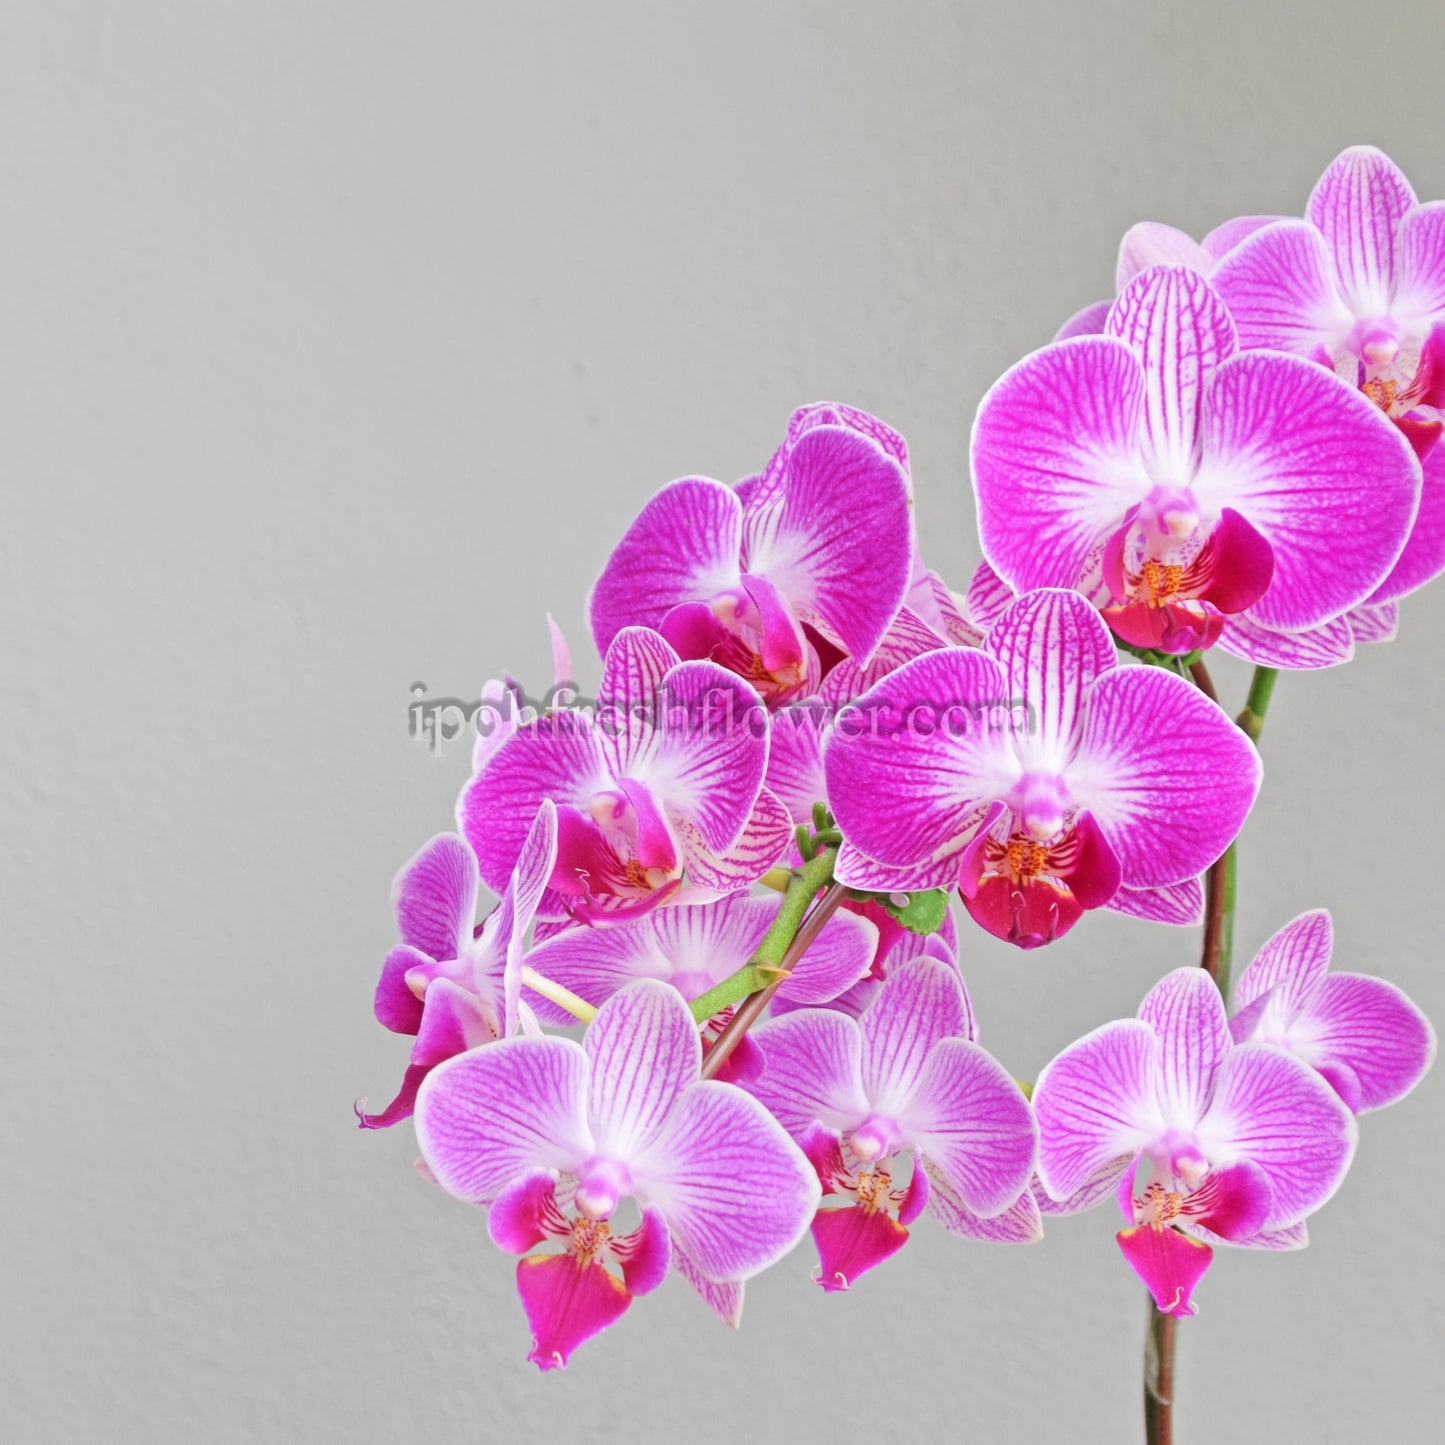 Mini Fresh Phalaenopsis Orchid| Flower Delivery Online